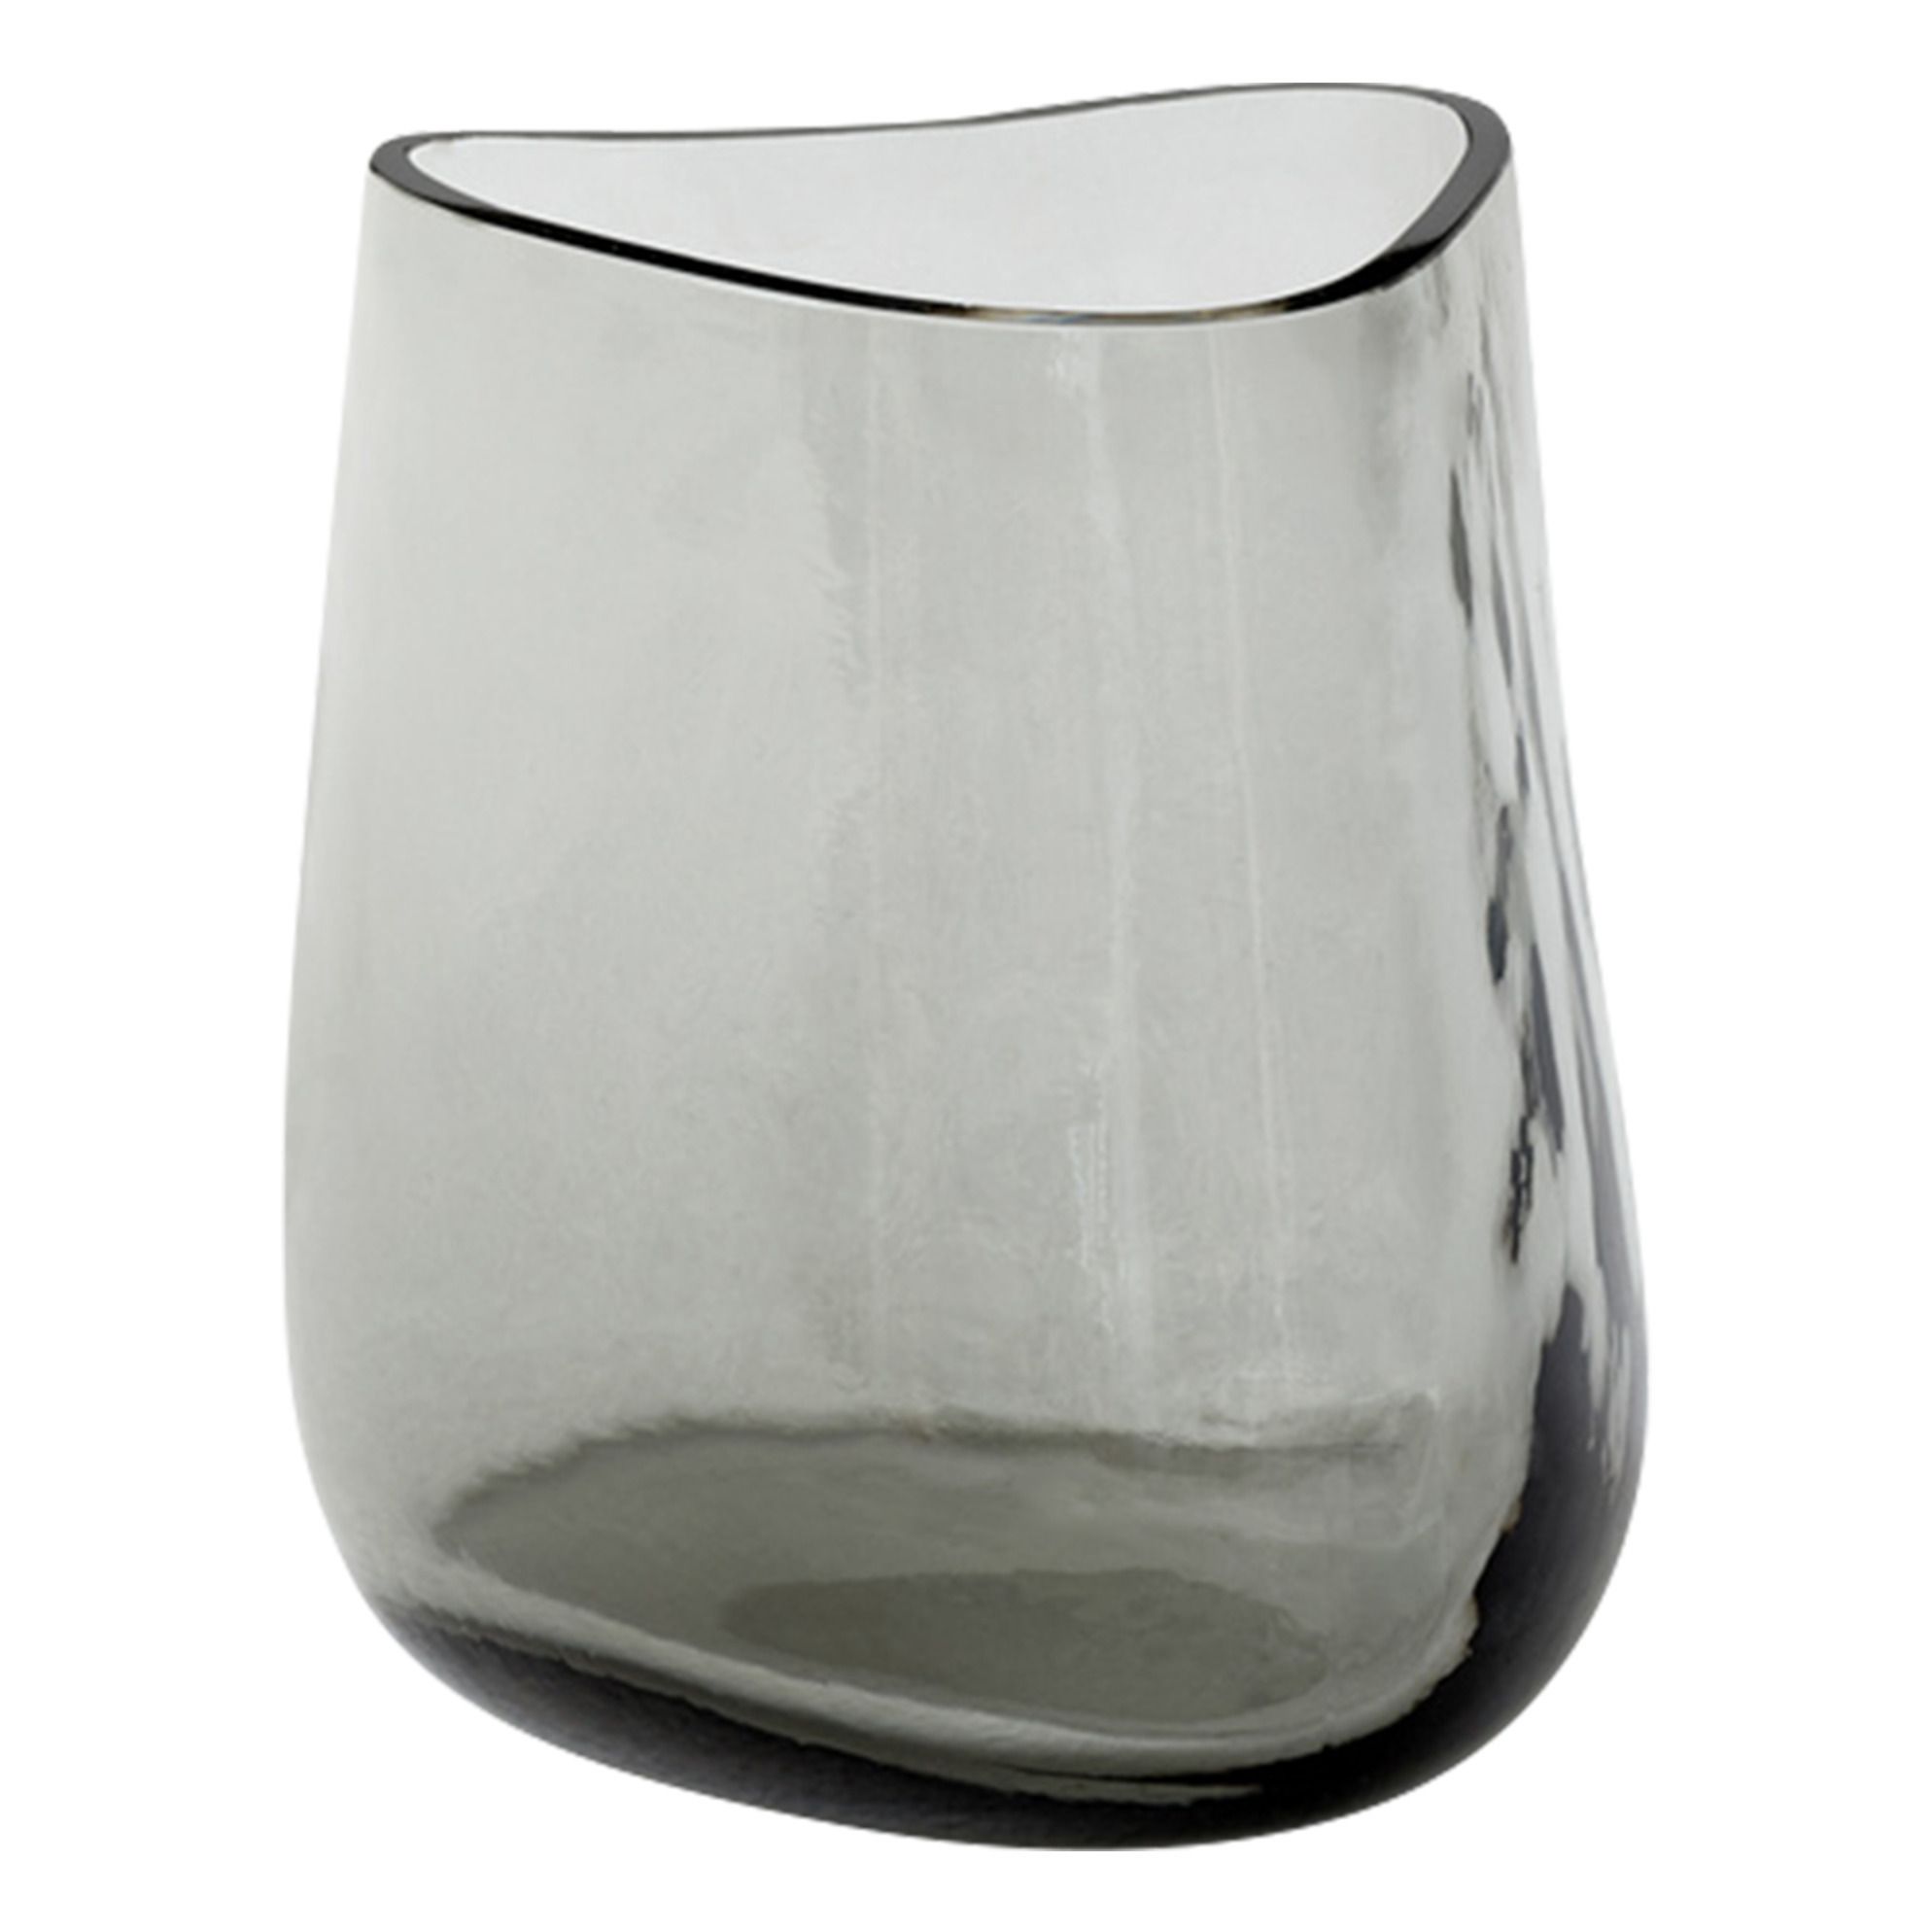 & Tradition - Vase Collect - Gris